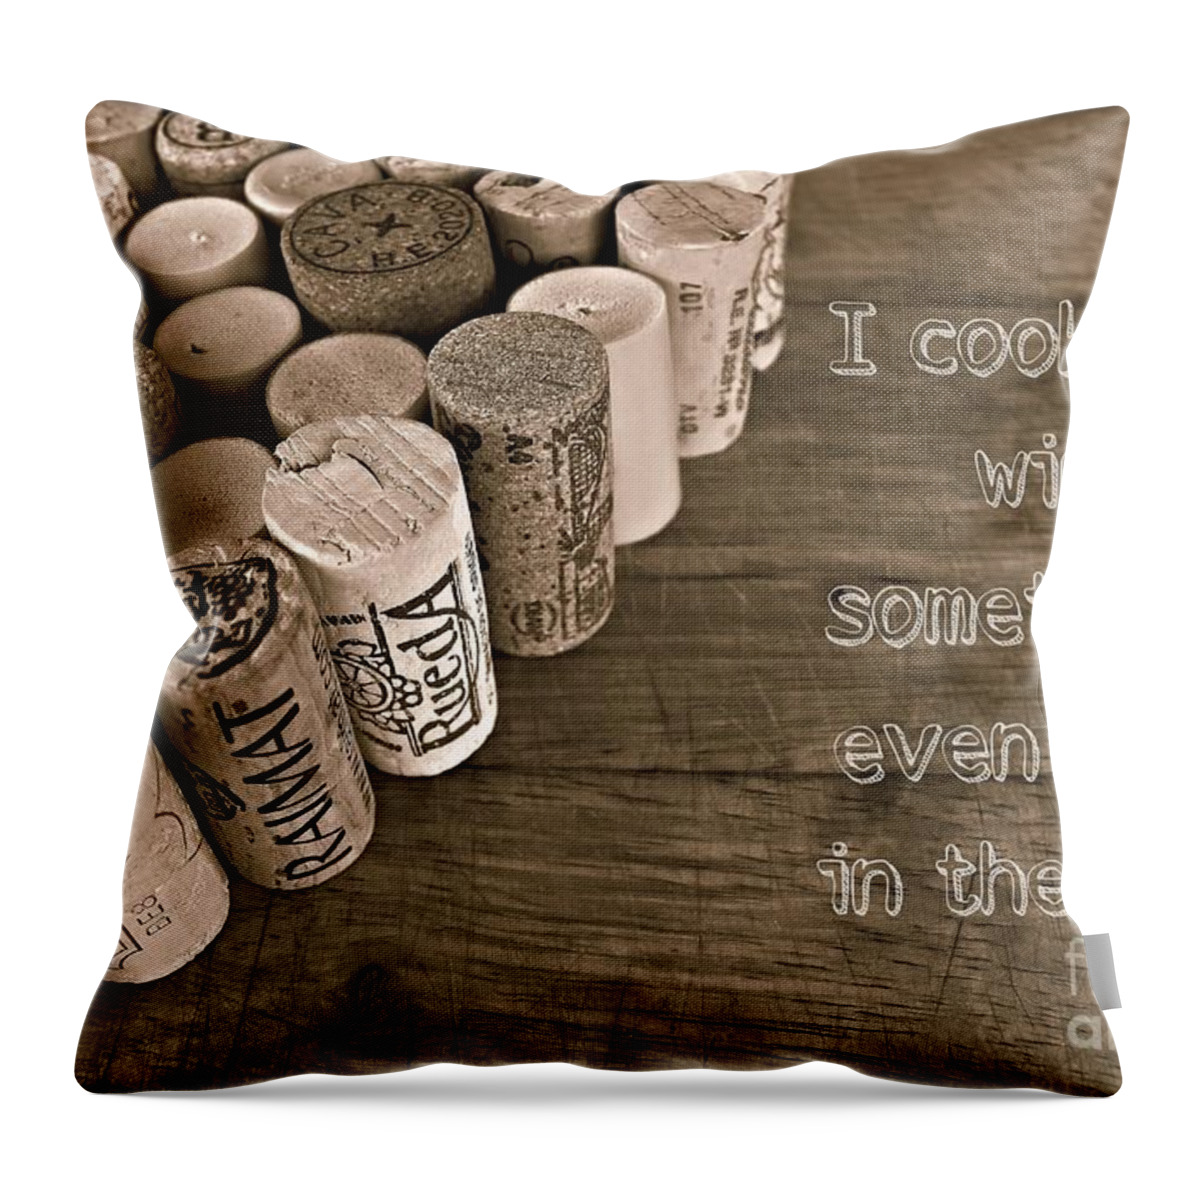 Wine Throw Pillow featuring the photograph Kitchen Fun by Clare Bevan